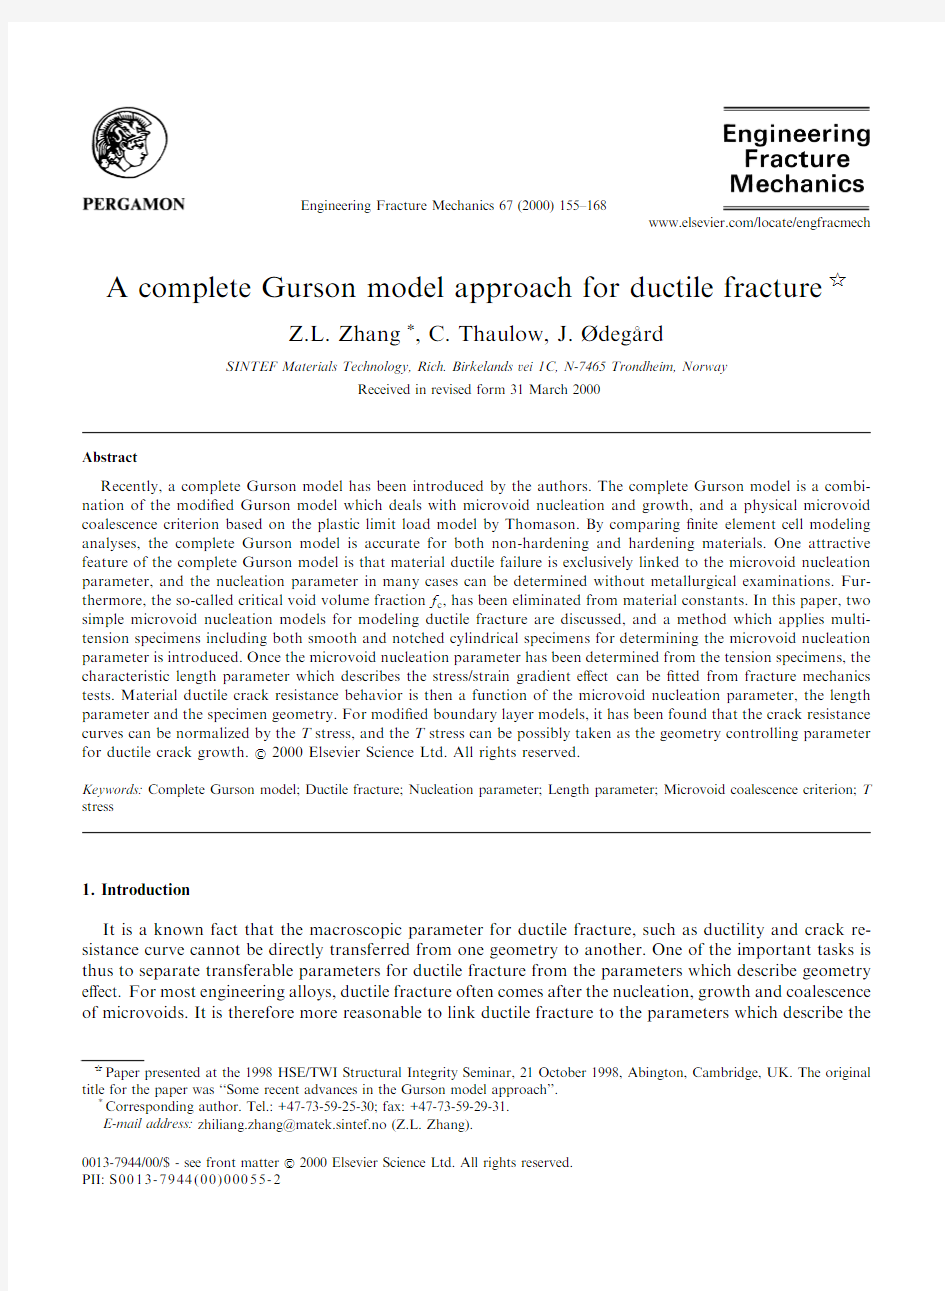 A complete Gurson model approach for ductile fracture